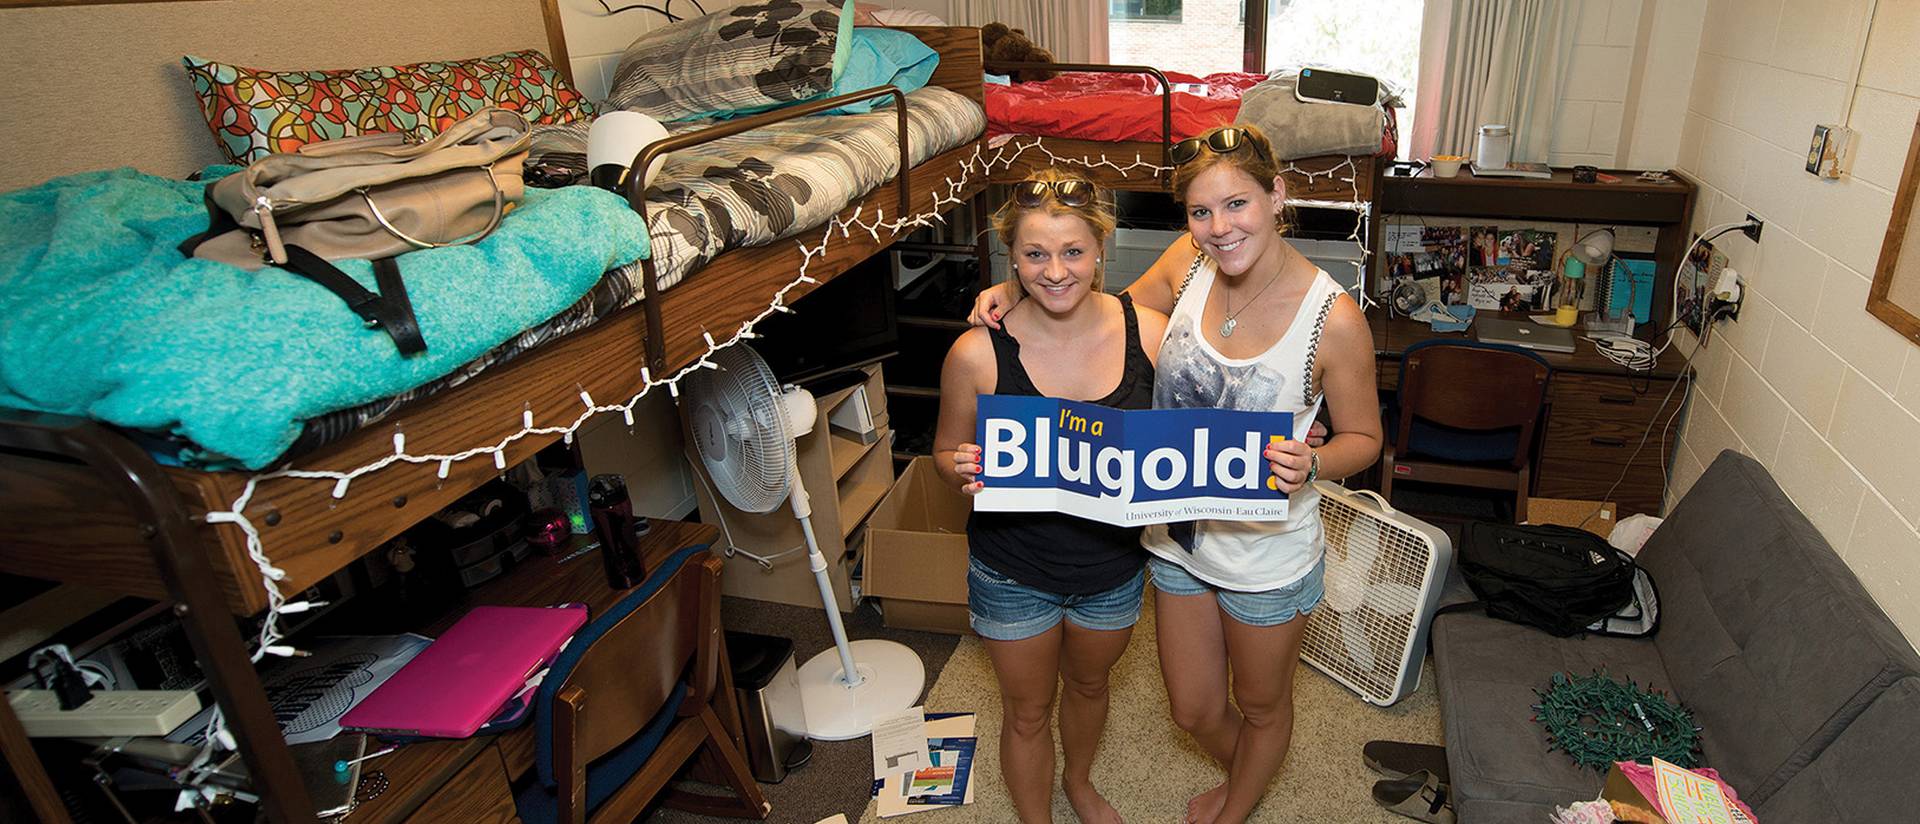 Roommates posing for a picture on move-in day.